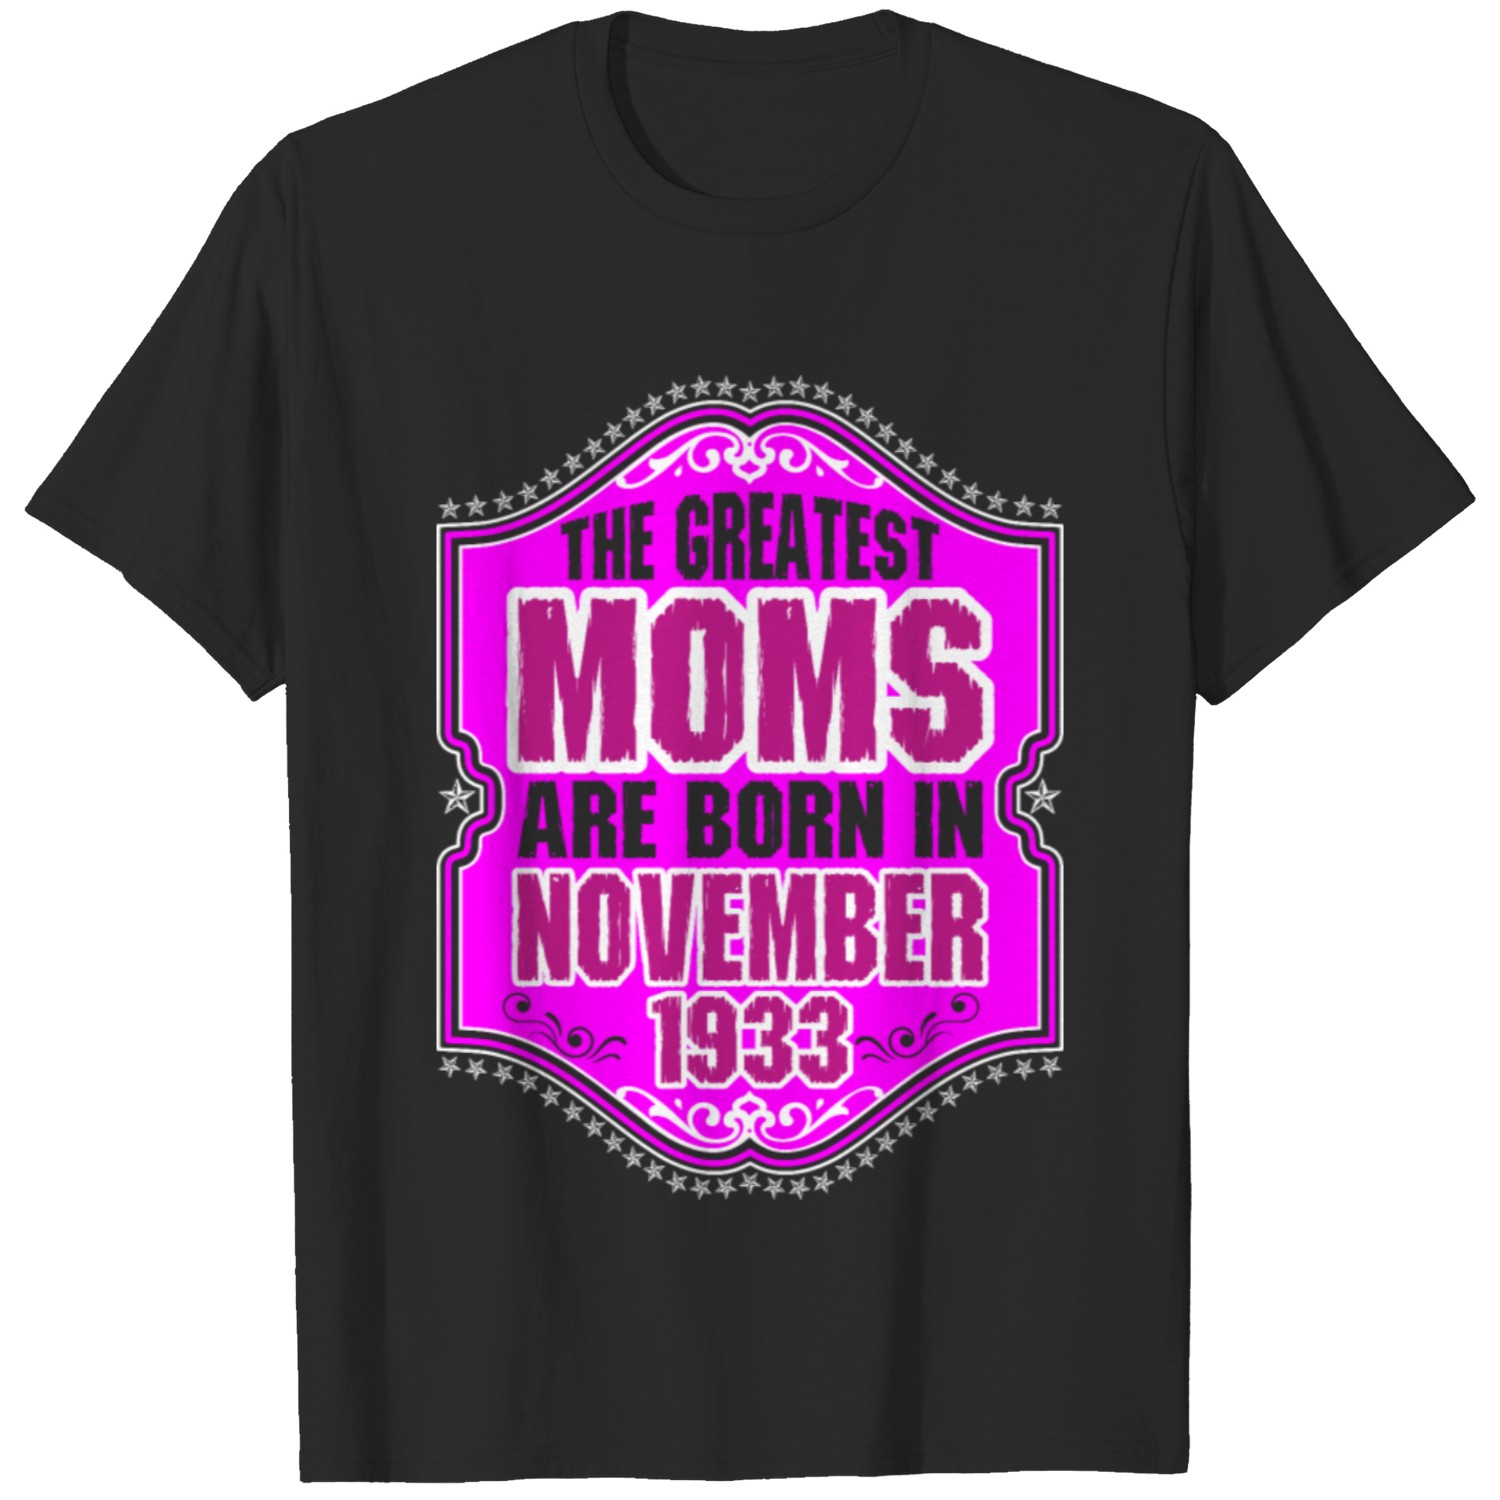 The Greatest Moms Are Born In November 1933 T-shirt